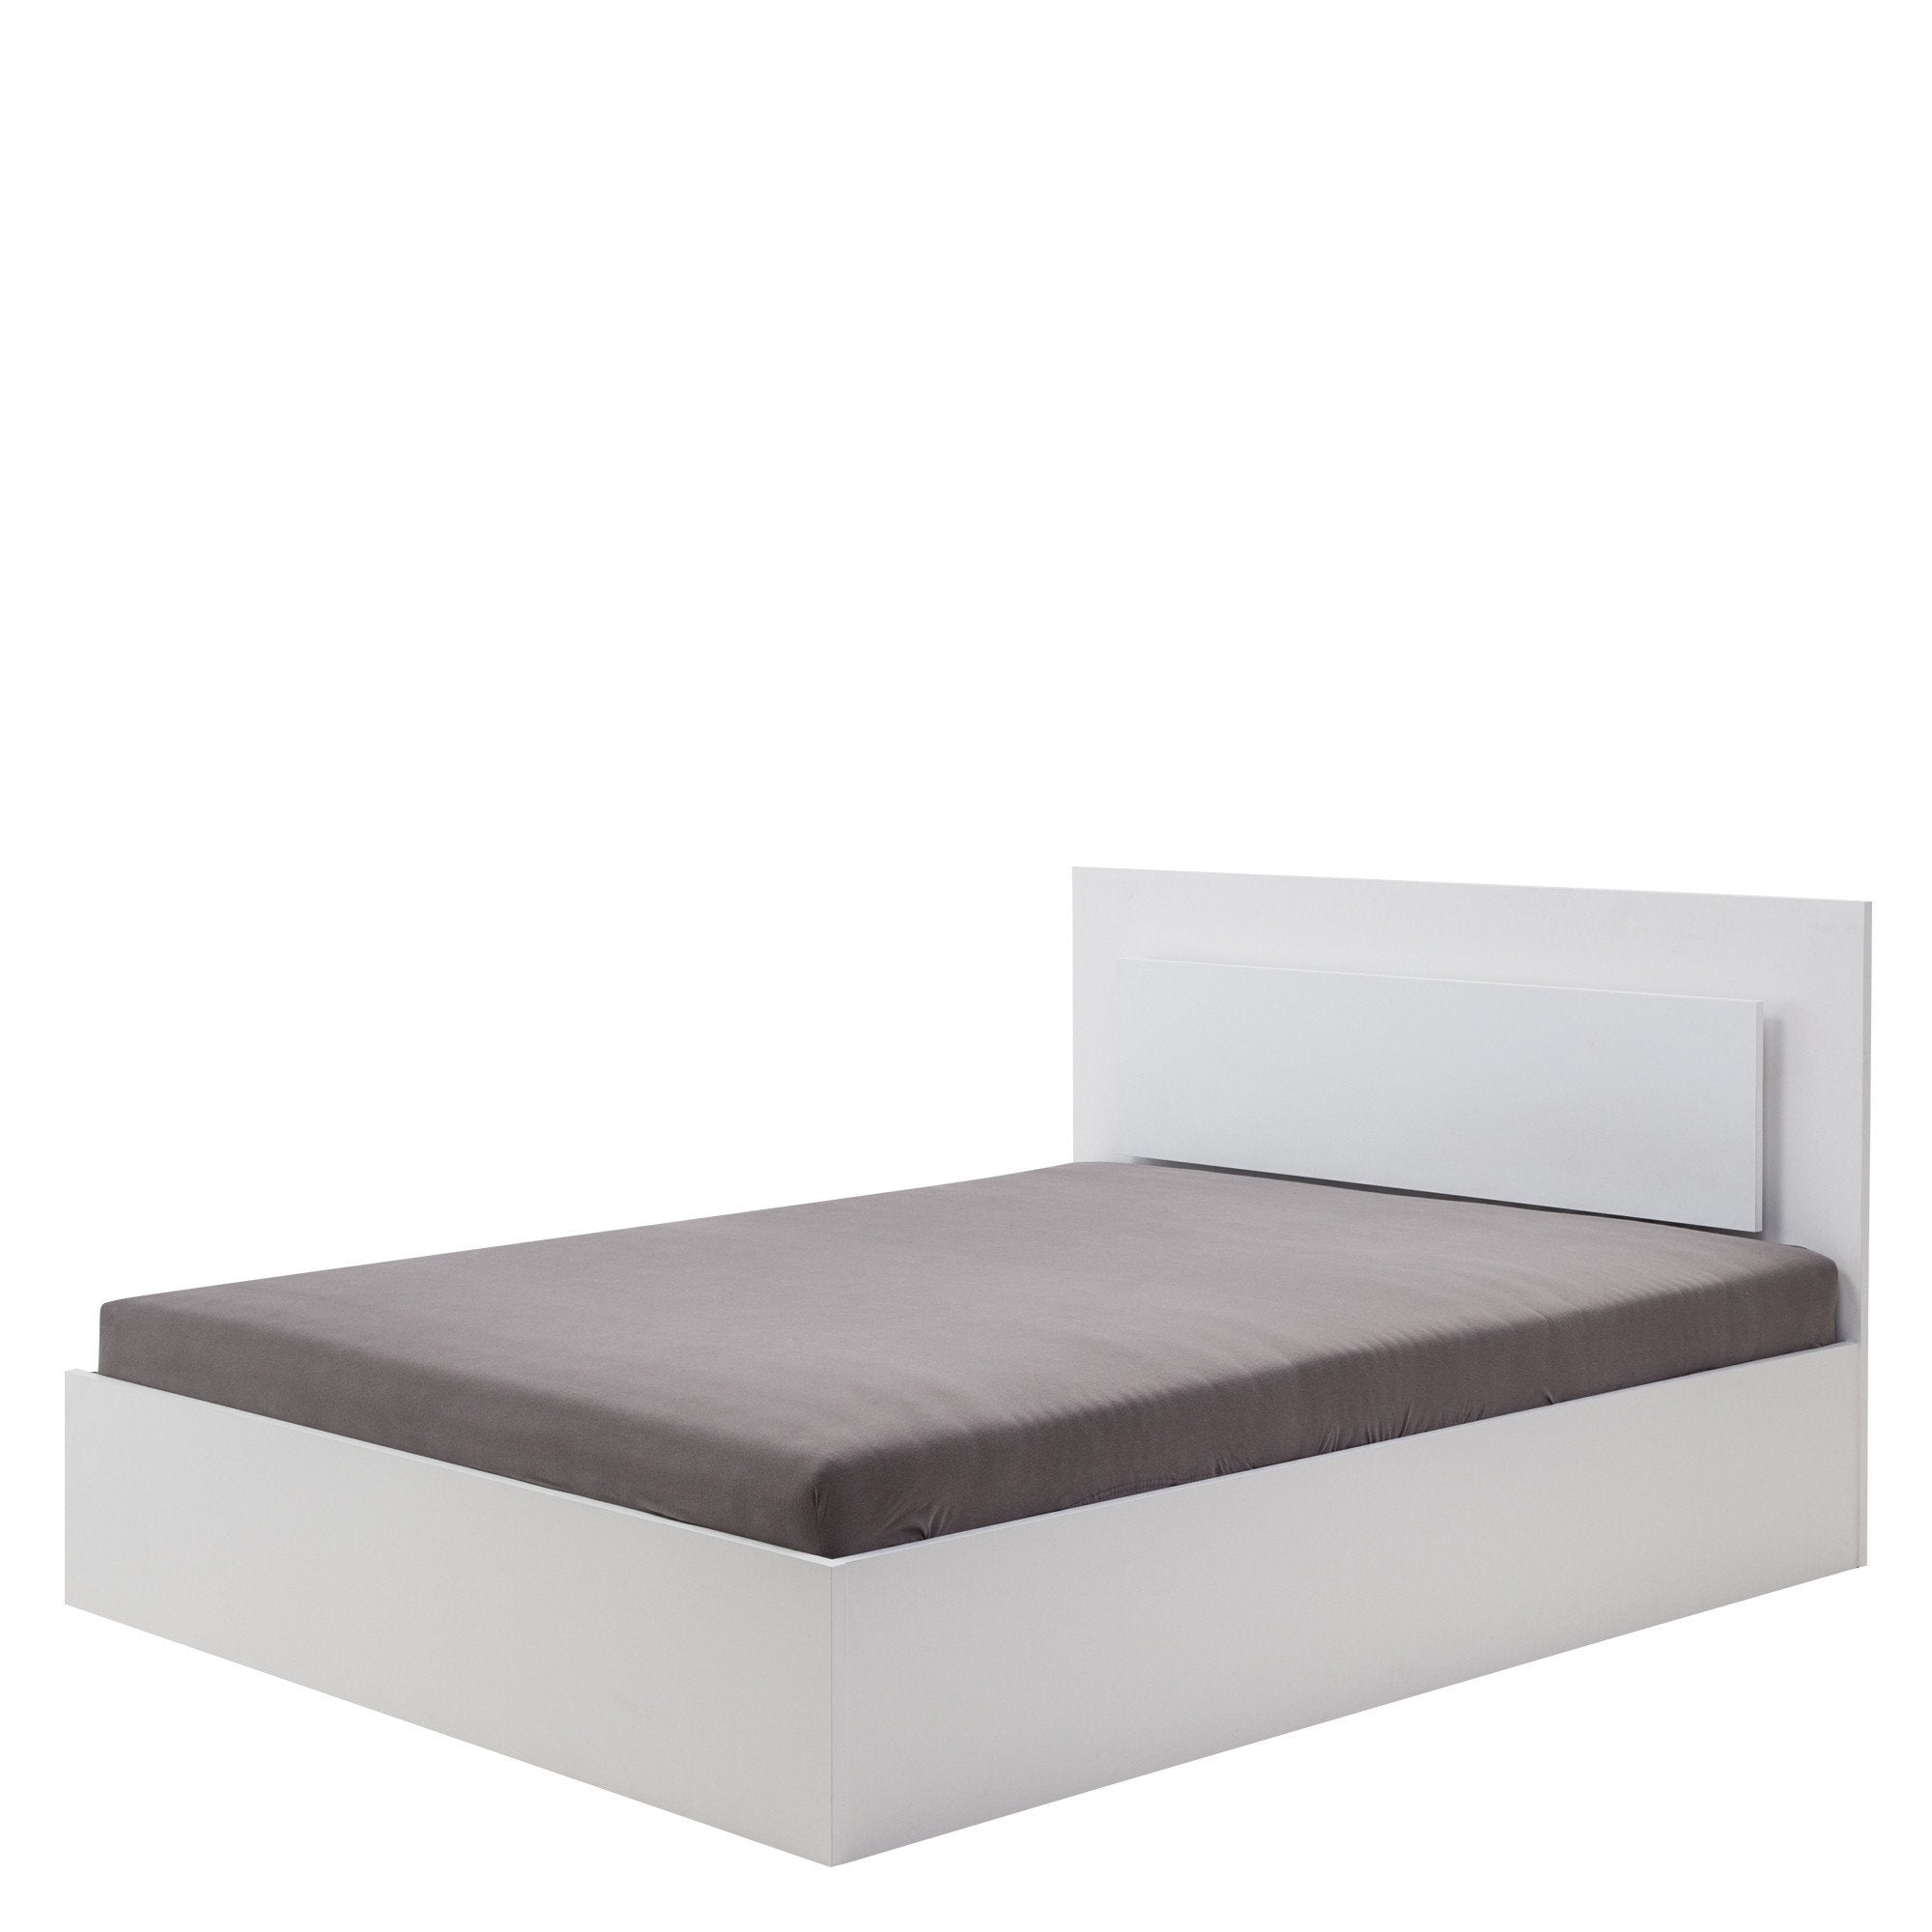 View Siena Bed with LED White Gloss 160 x 200cm No information